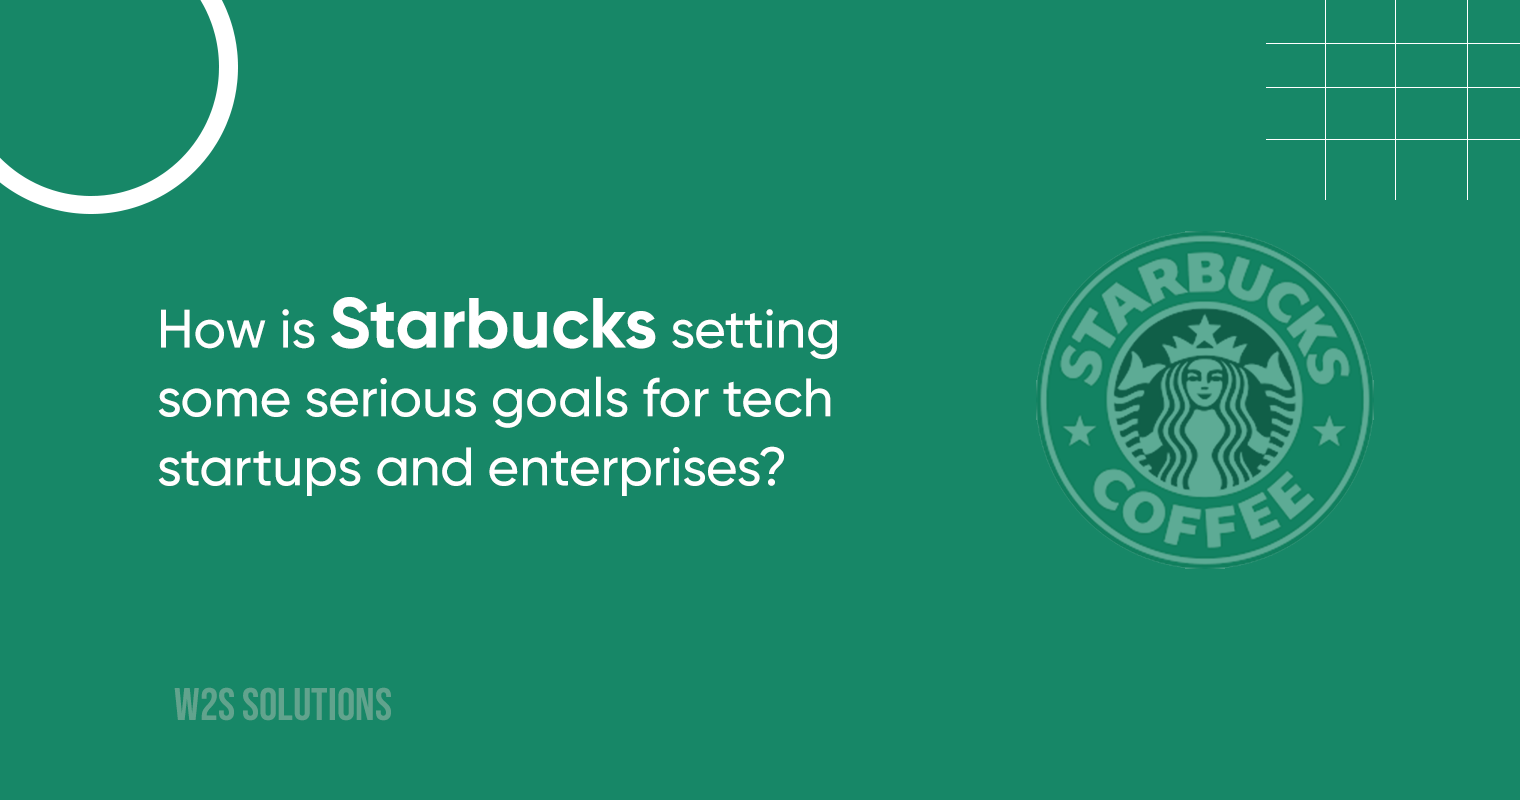 How is Starbucks setting some serious goals for tech startups and enterprises?